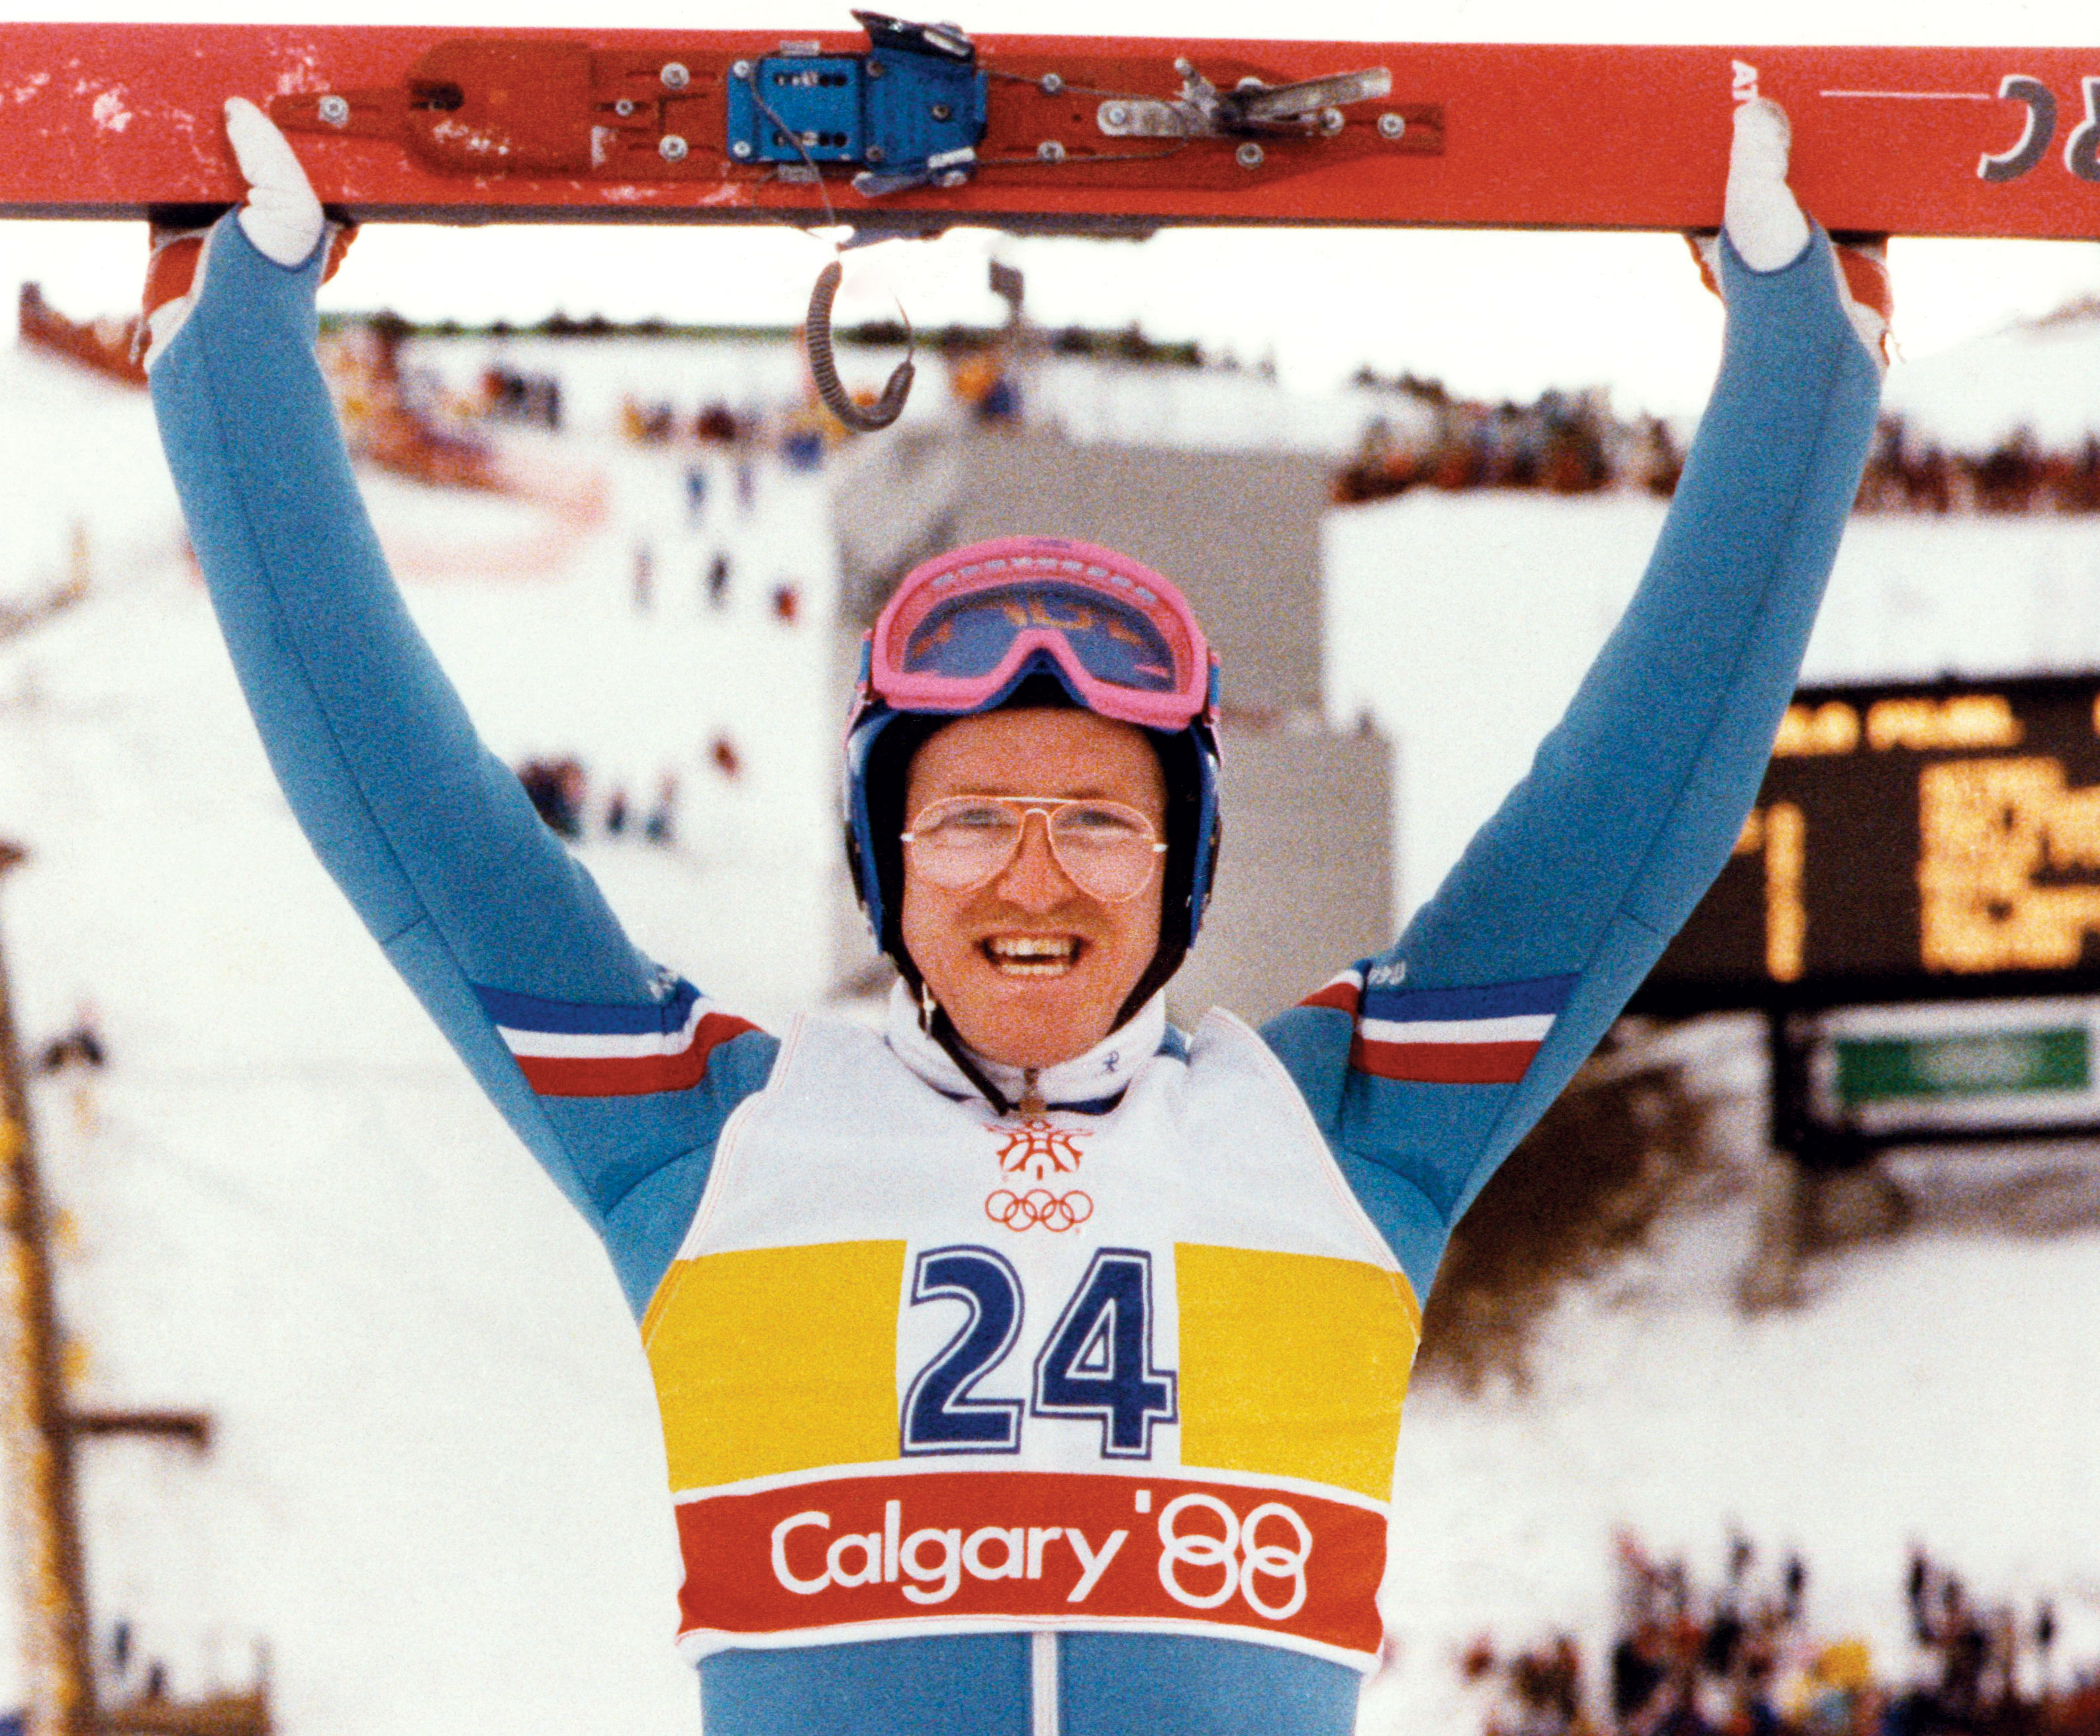 HQ Eddie The Eagle Wallpapers | File 1600.39Kb